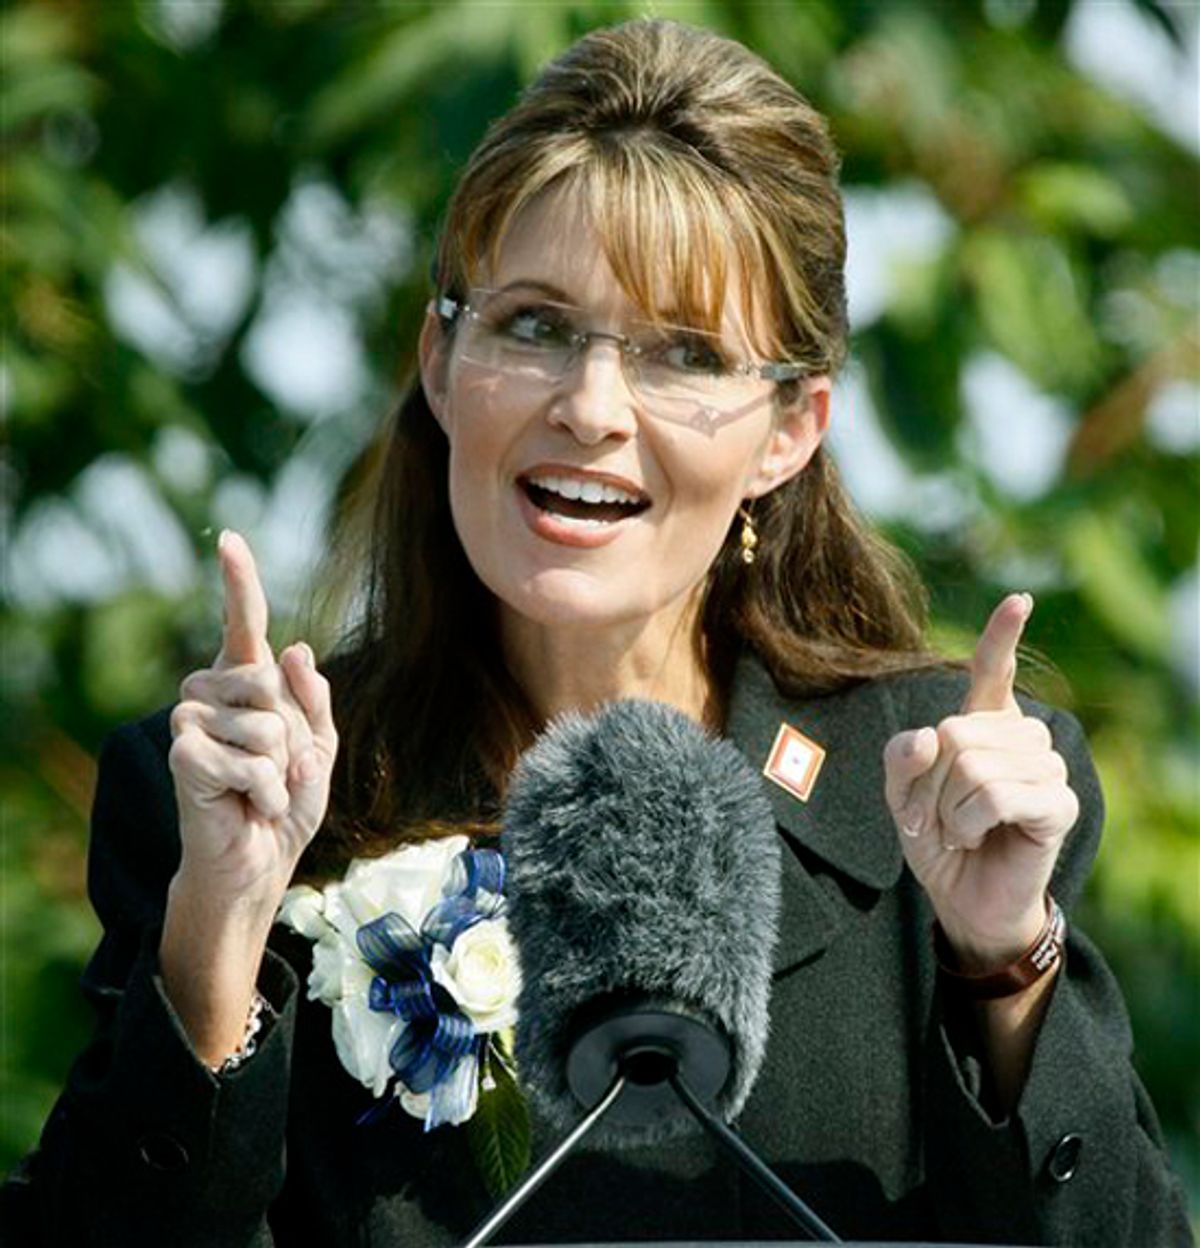 FILE - In this July 26, 2009 file photo shows Alaska Gov. Sarah Palin gestures while giving her resignation speech in Fairbanks, Alaska. A year after her abrupt resignation as Alaska governor, Palin has evolved into a political personality writ large, commanding weeks of headlines for a single Facebook observation _ see health care "death panels" _ and six-figure speaking fees from groups clamoring for her words. Going rogue with a best-selling memoir only added to her aura among the conservative faithful and she has easily eclipsed other Republicans as the coveted endorsement this election year.  (AP Photo/Al Grillo, file ) (Al Grillo)